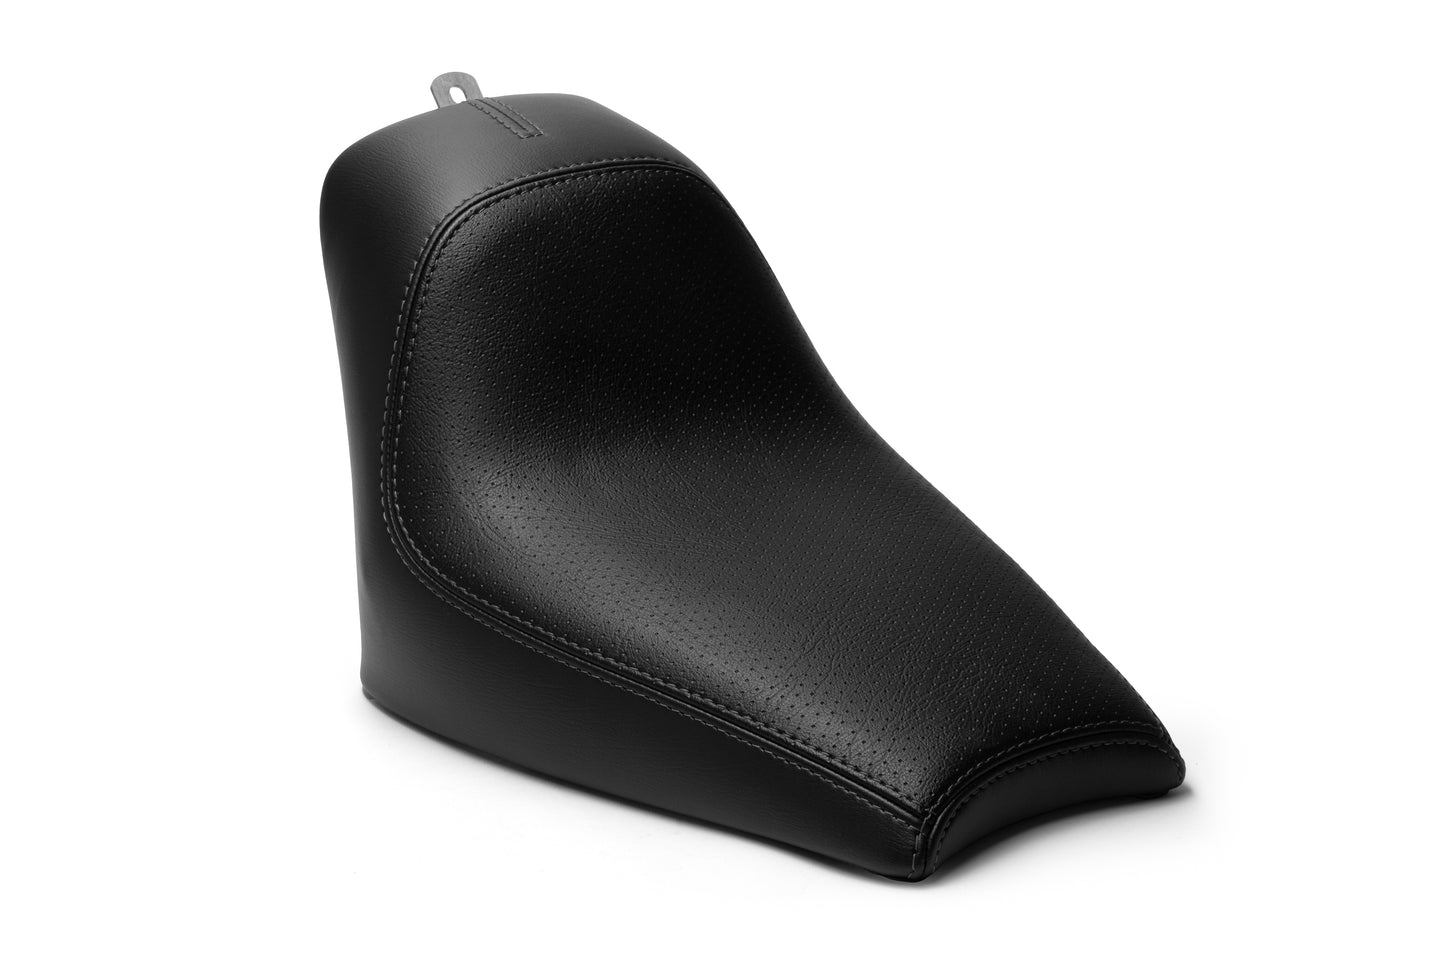 Harley Davidson Indian scout solo seat by Killer Custom white background